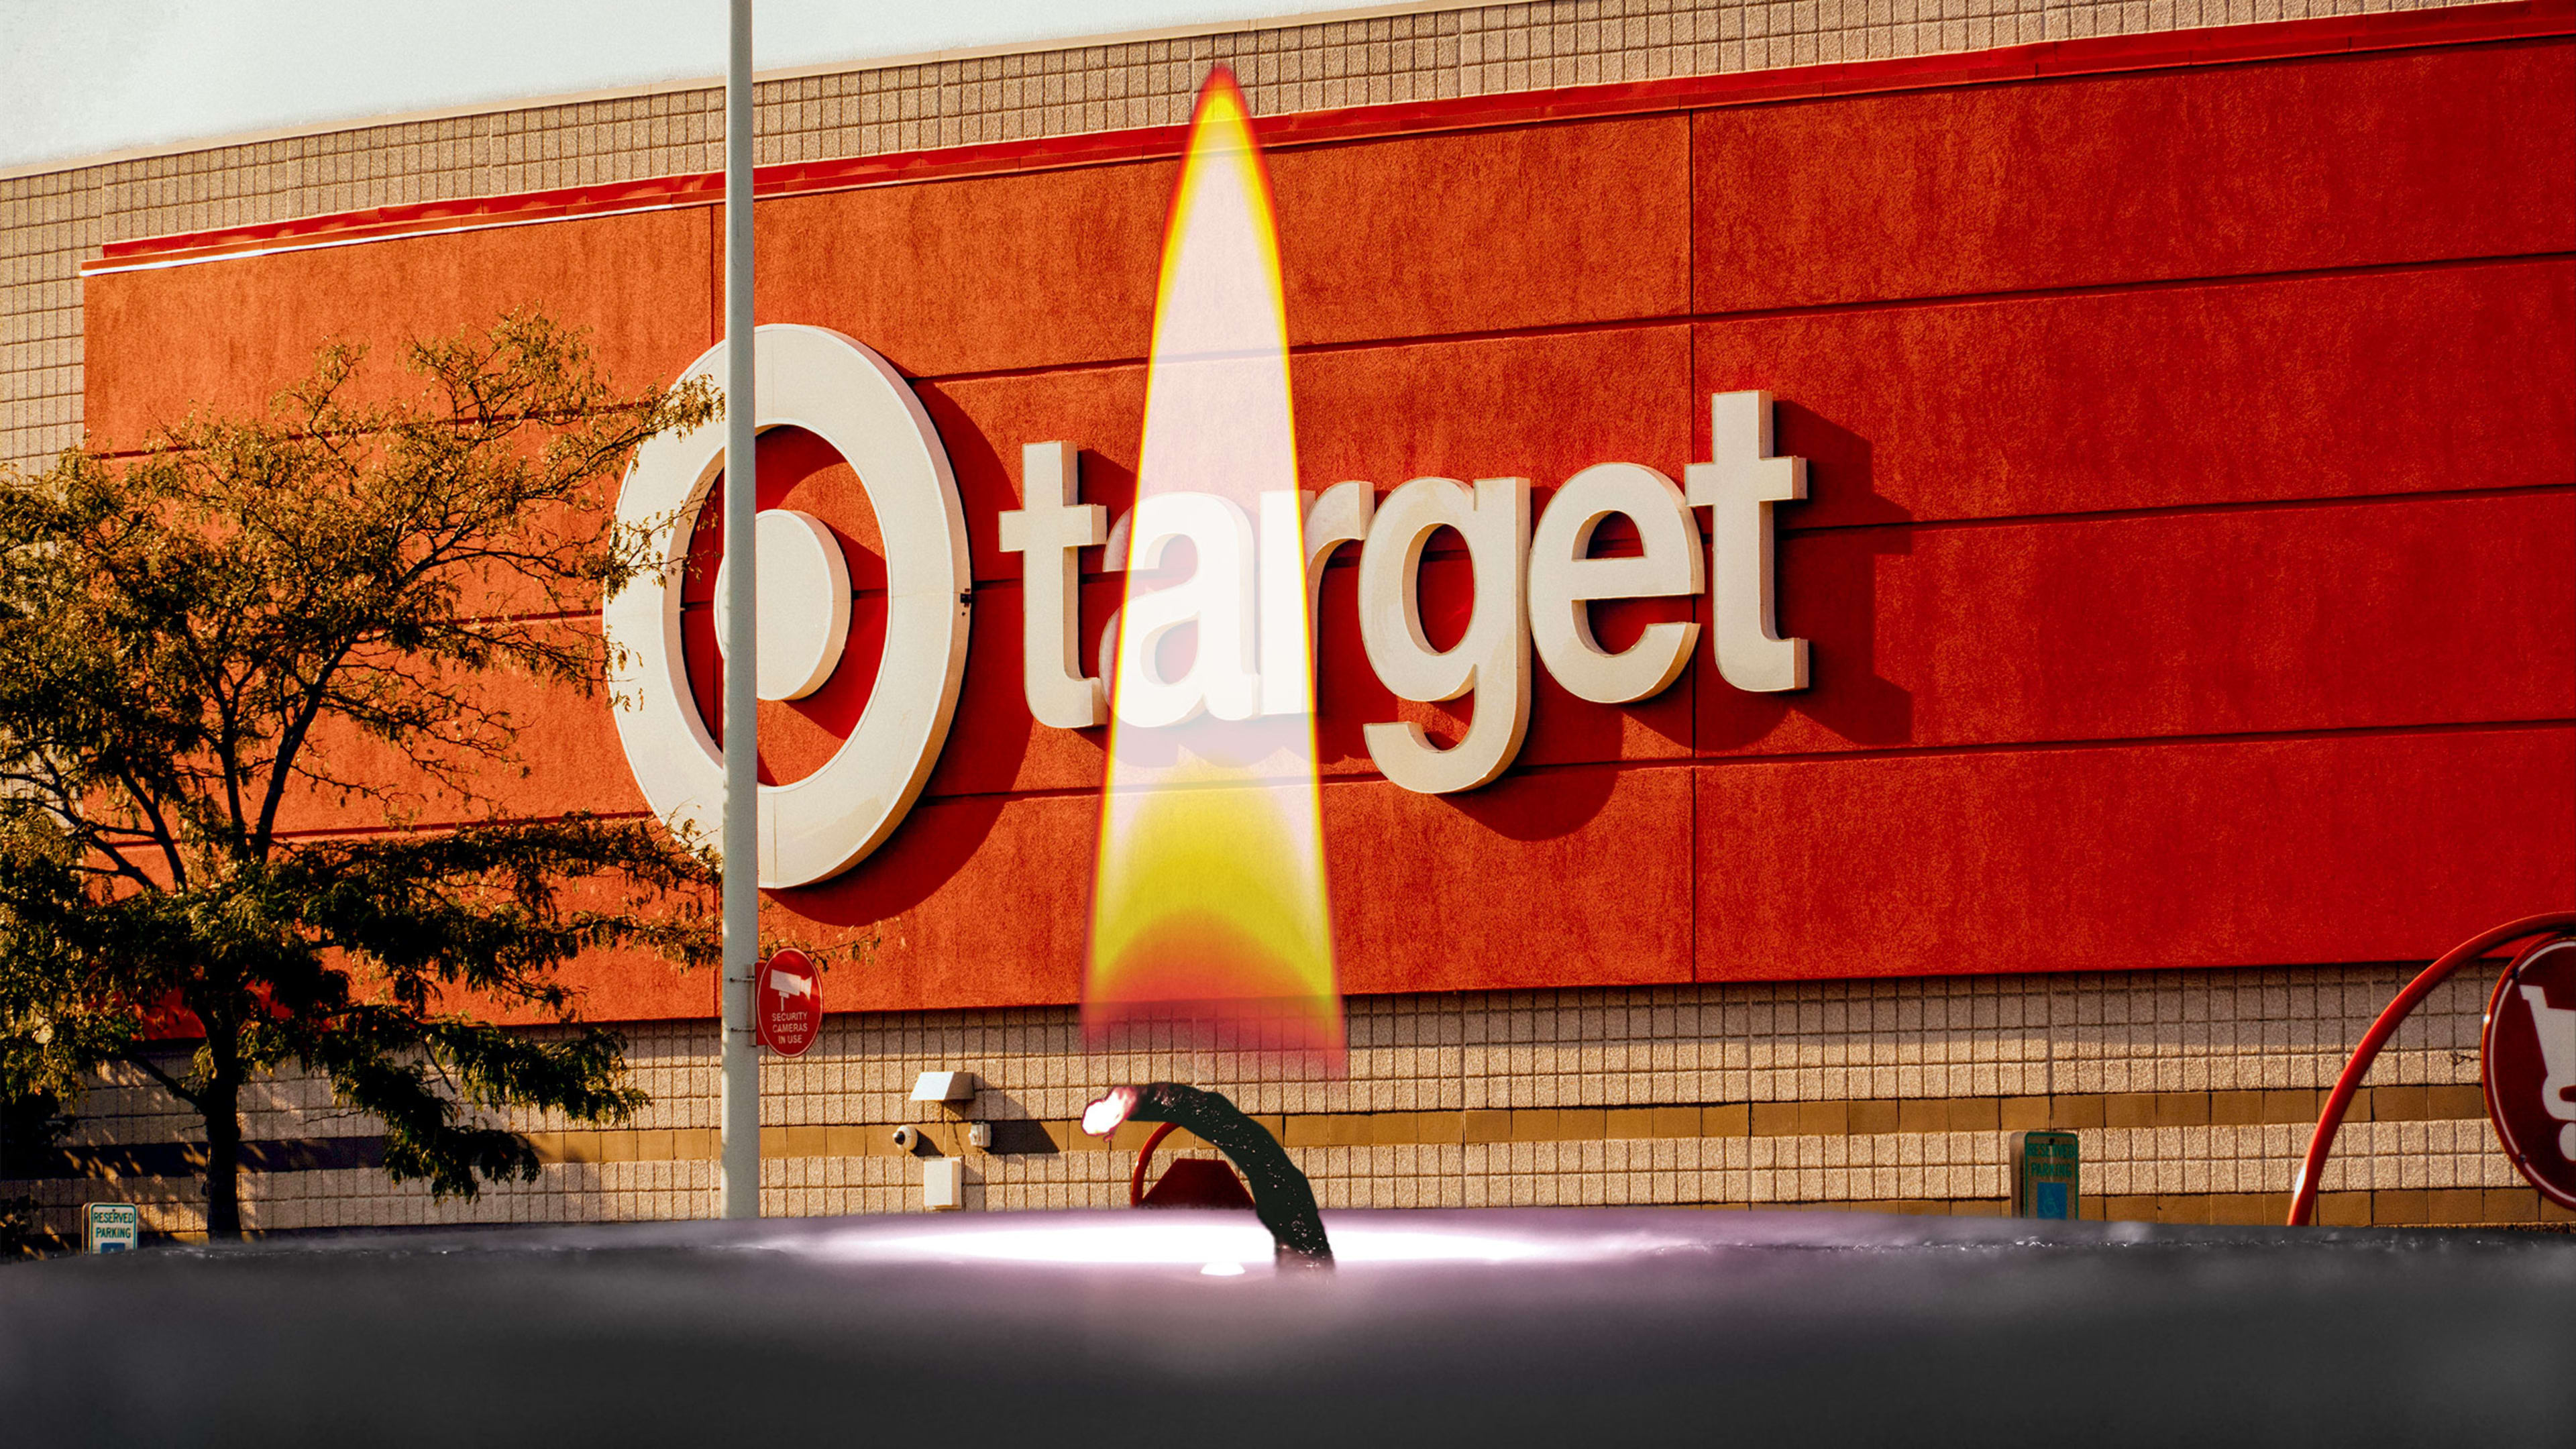 Target recalls 5 million candles after severe burns: ‘Immediately stop using’ them